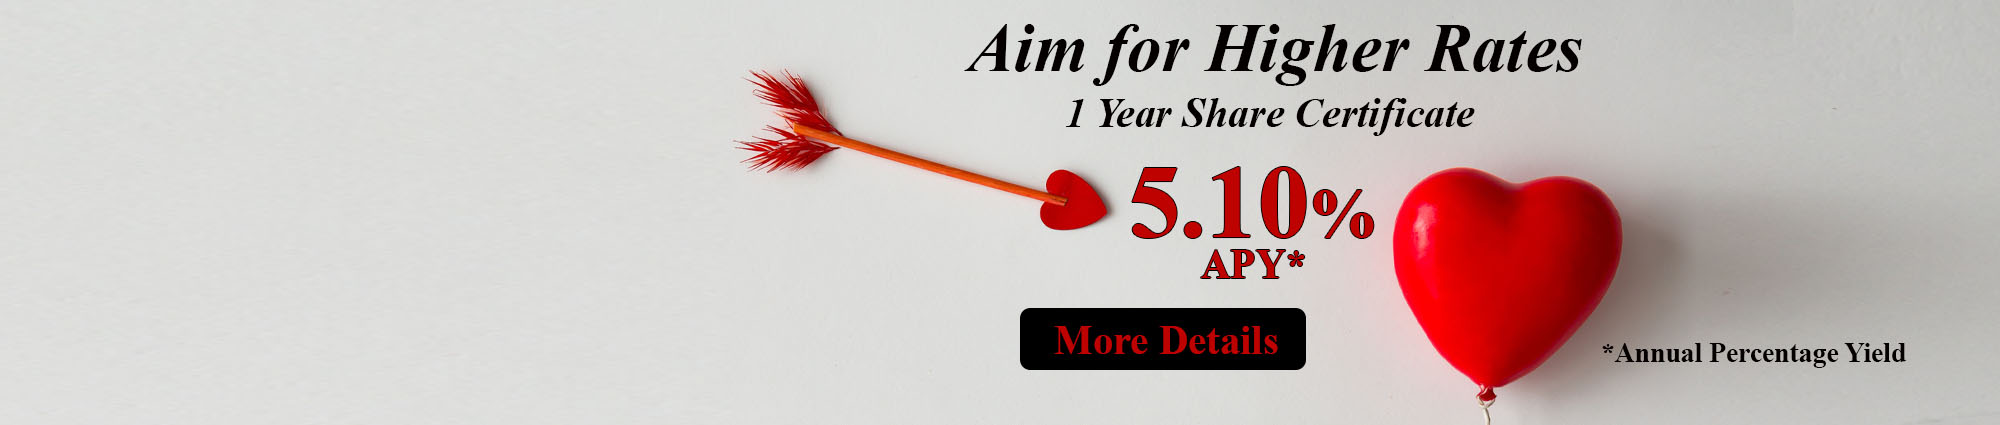 Aim for higher rates. one year share certificate five point one zero annual percentage yield. click for more details.